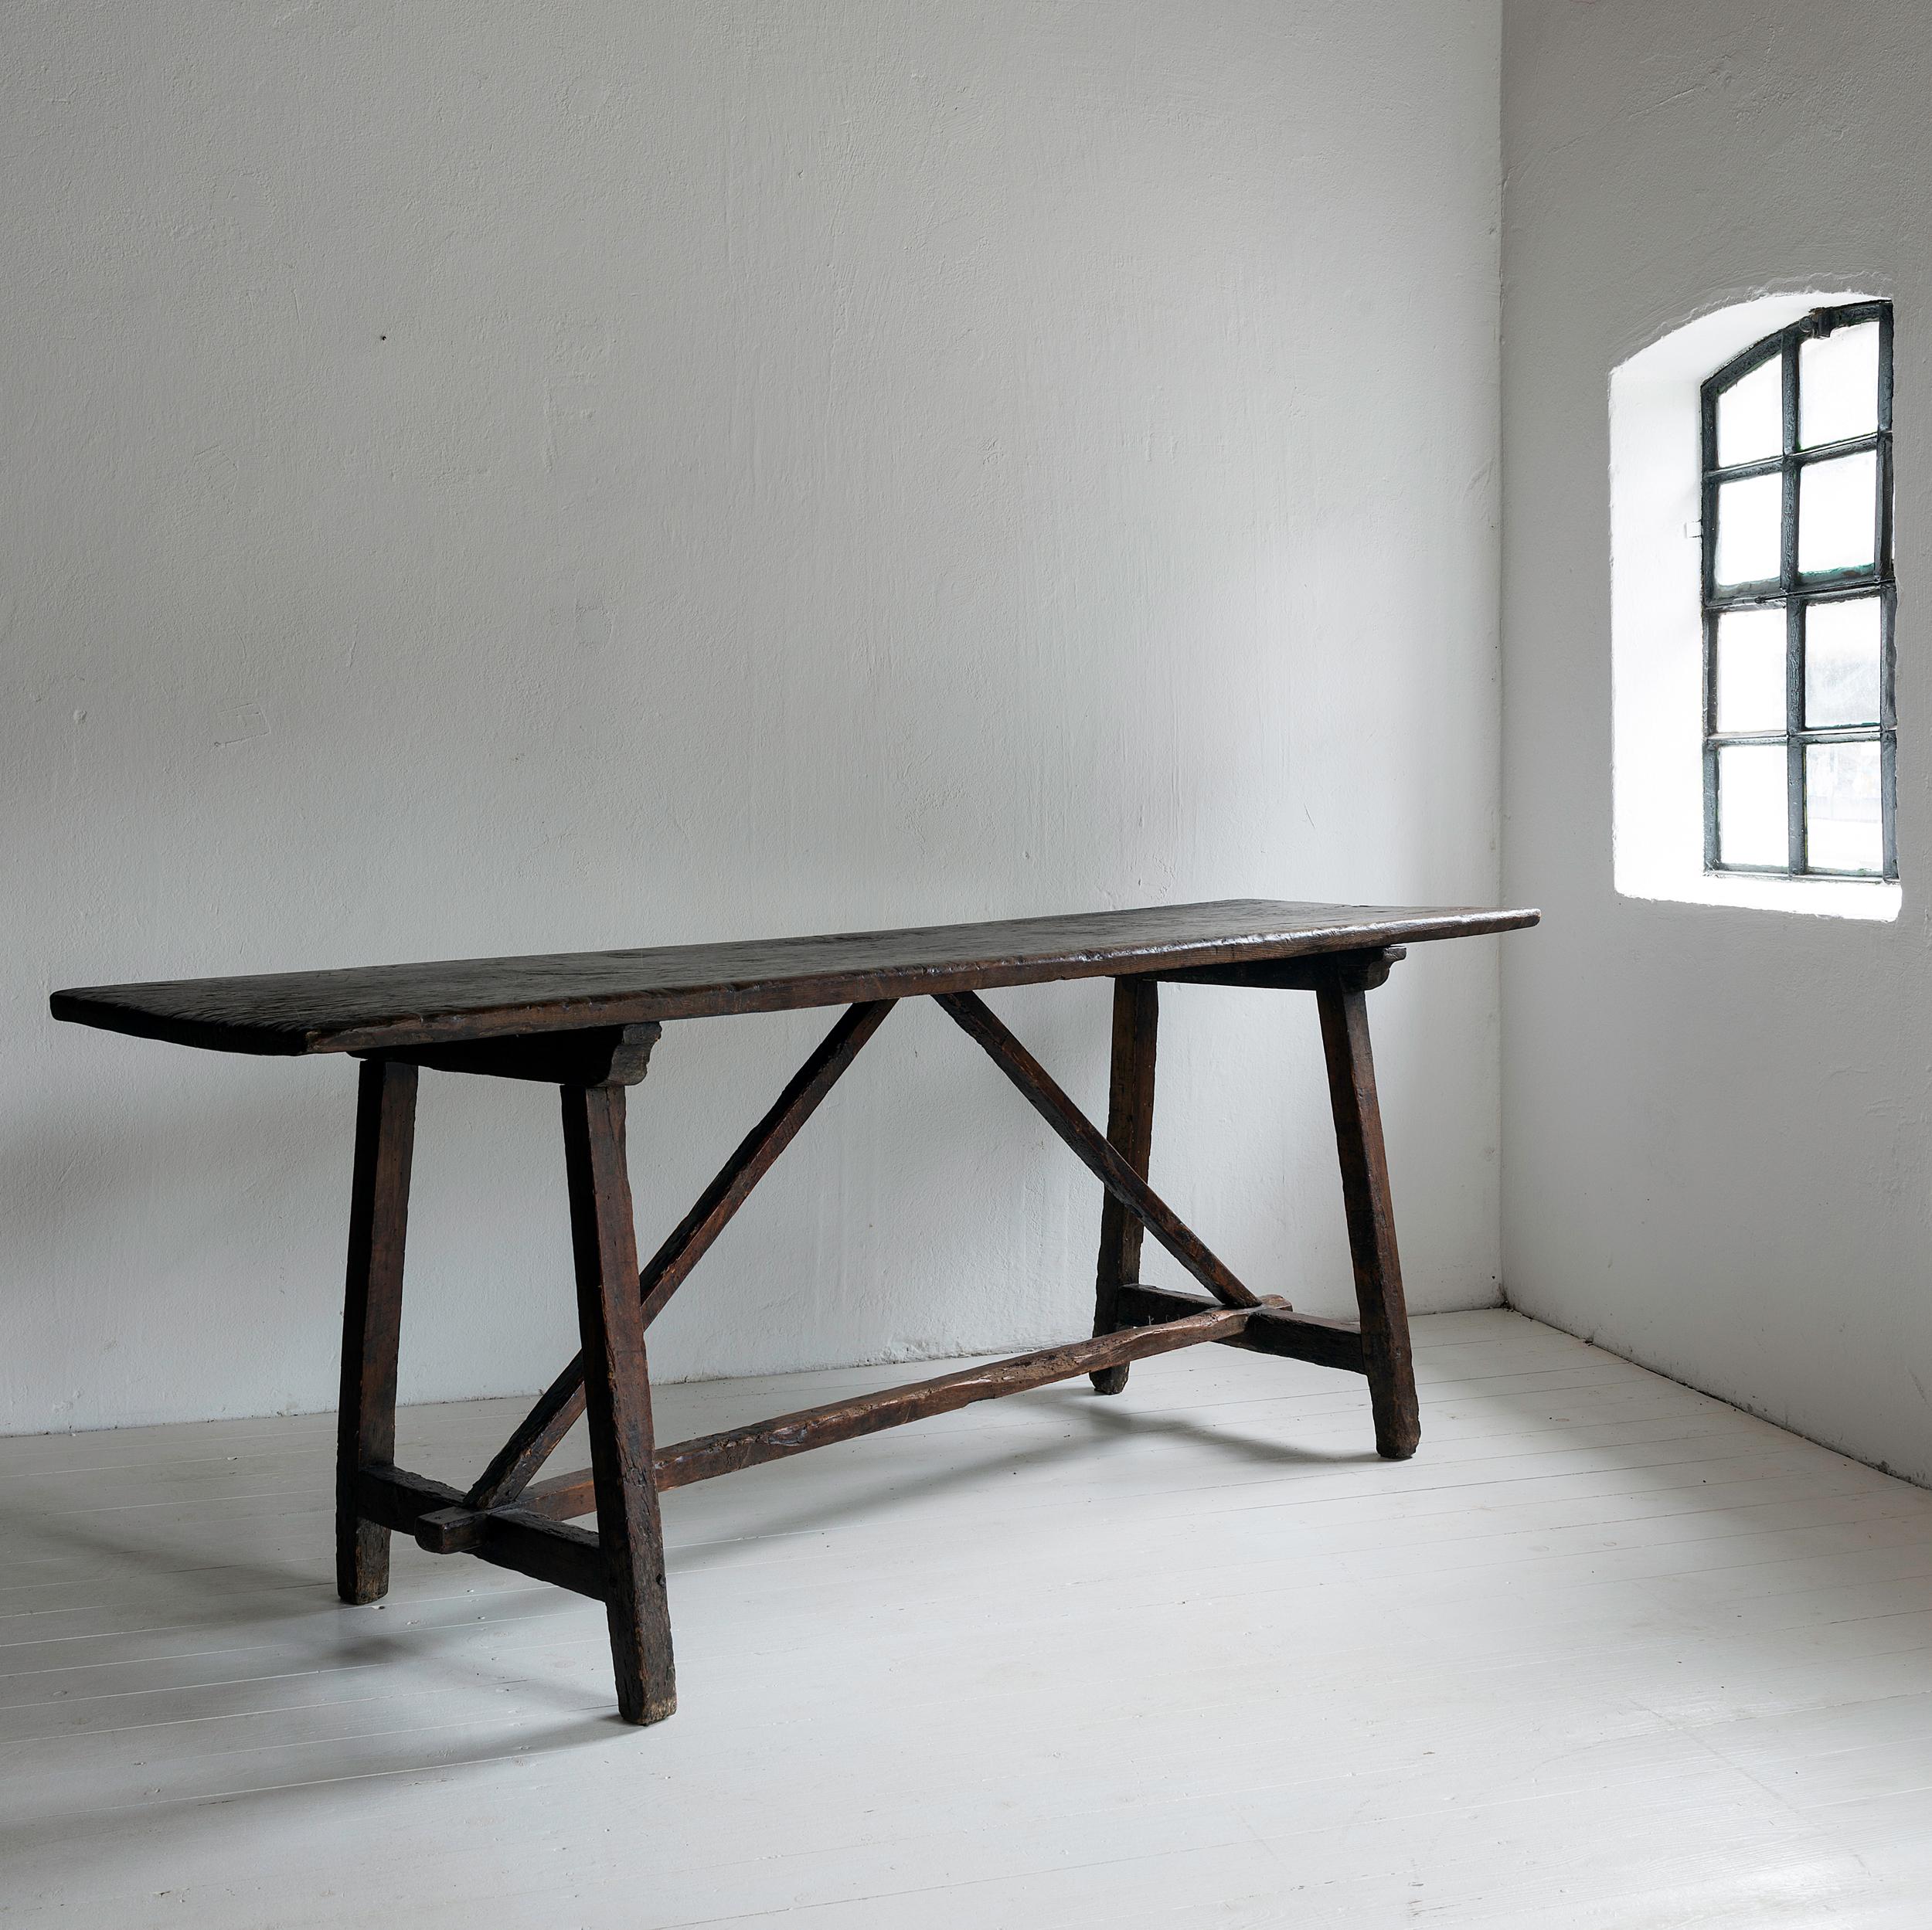 Baroque Exceptional 17th Century Minimalistic Table in Solid Walnut